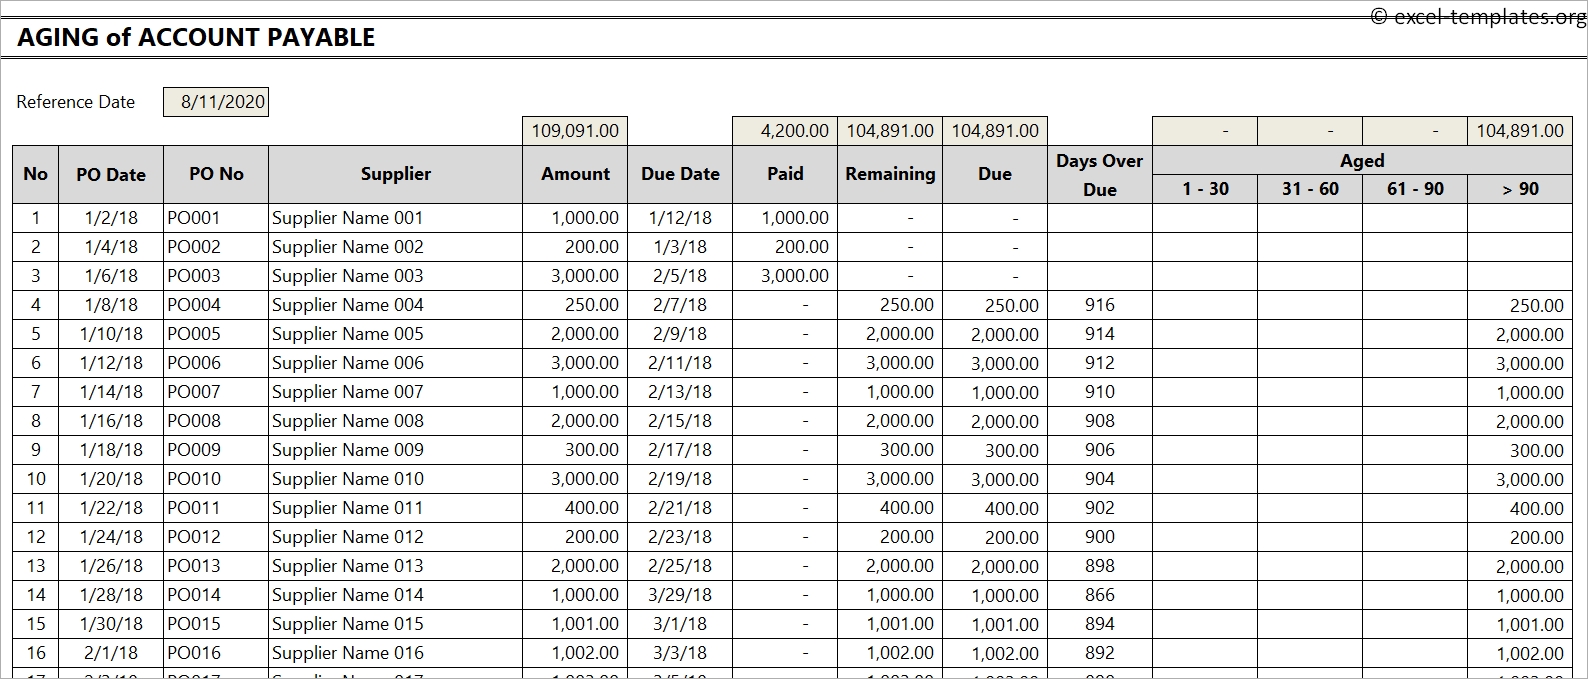 Aging Account Payable Template